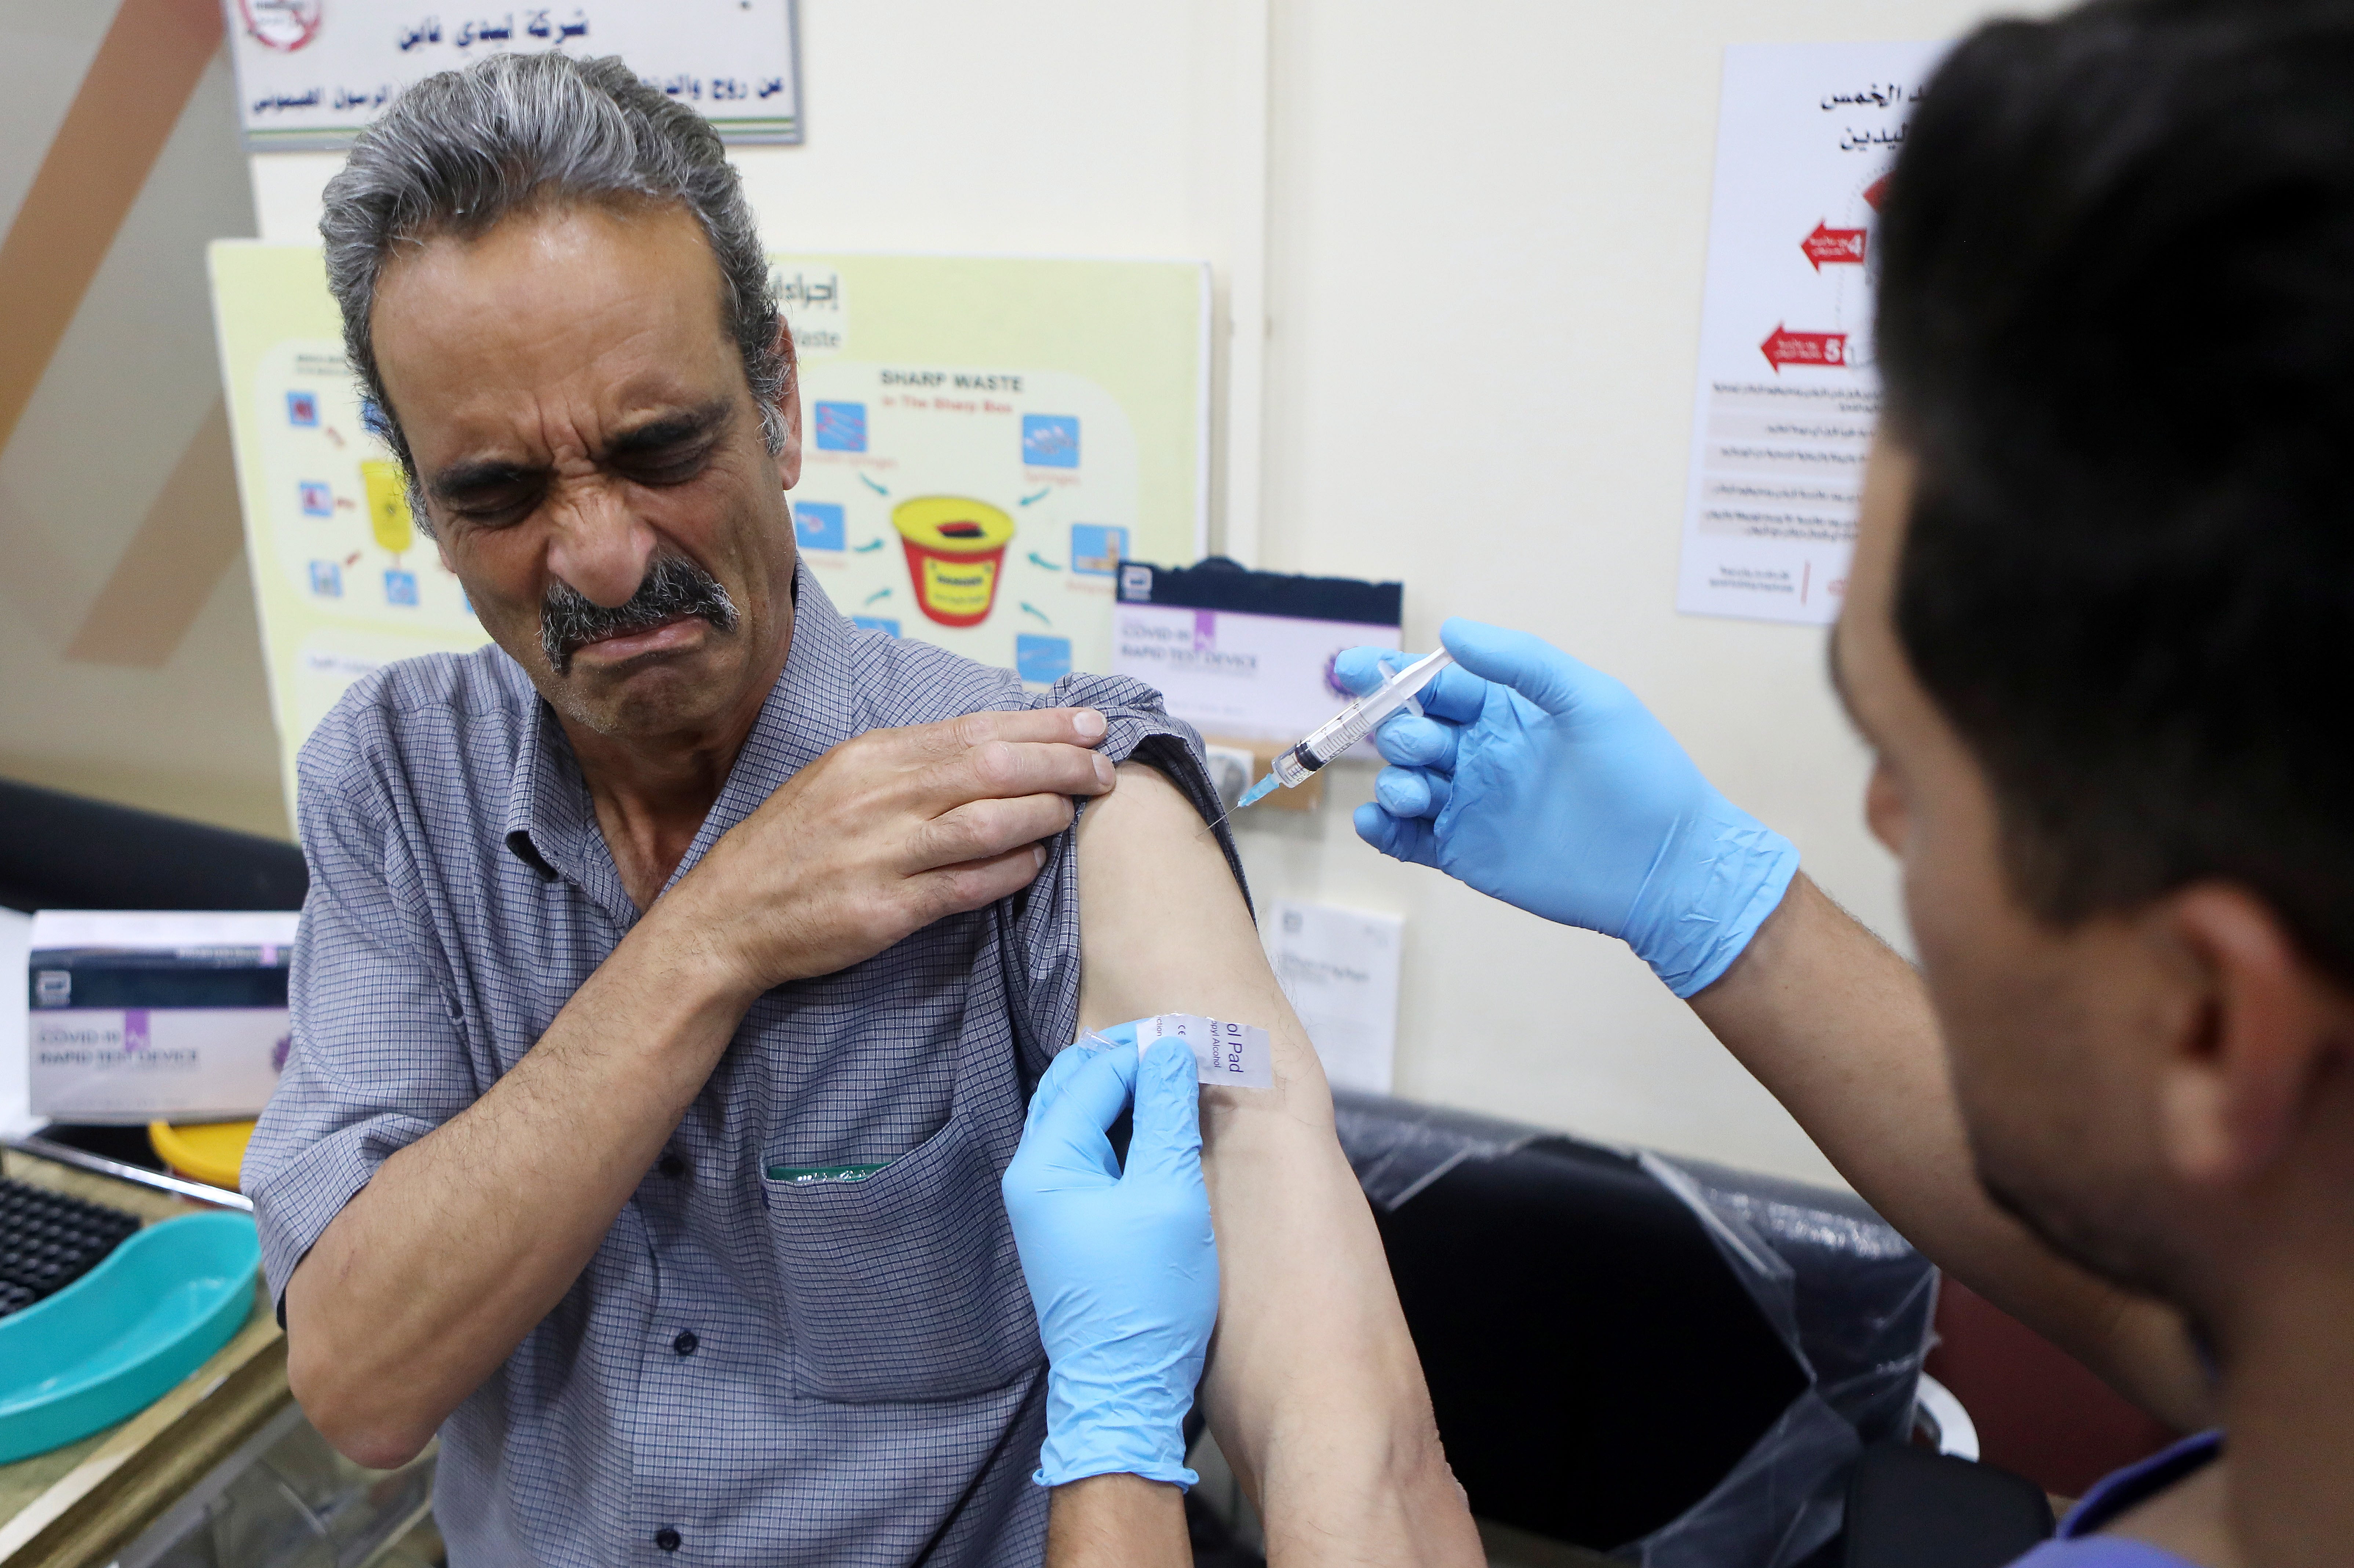 A Palestinian medical worker receives a Covi-19 vaccine at the Palestinian Red Crescent Hospital in the West Bank city of Hebron